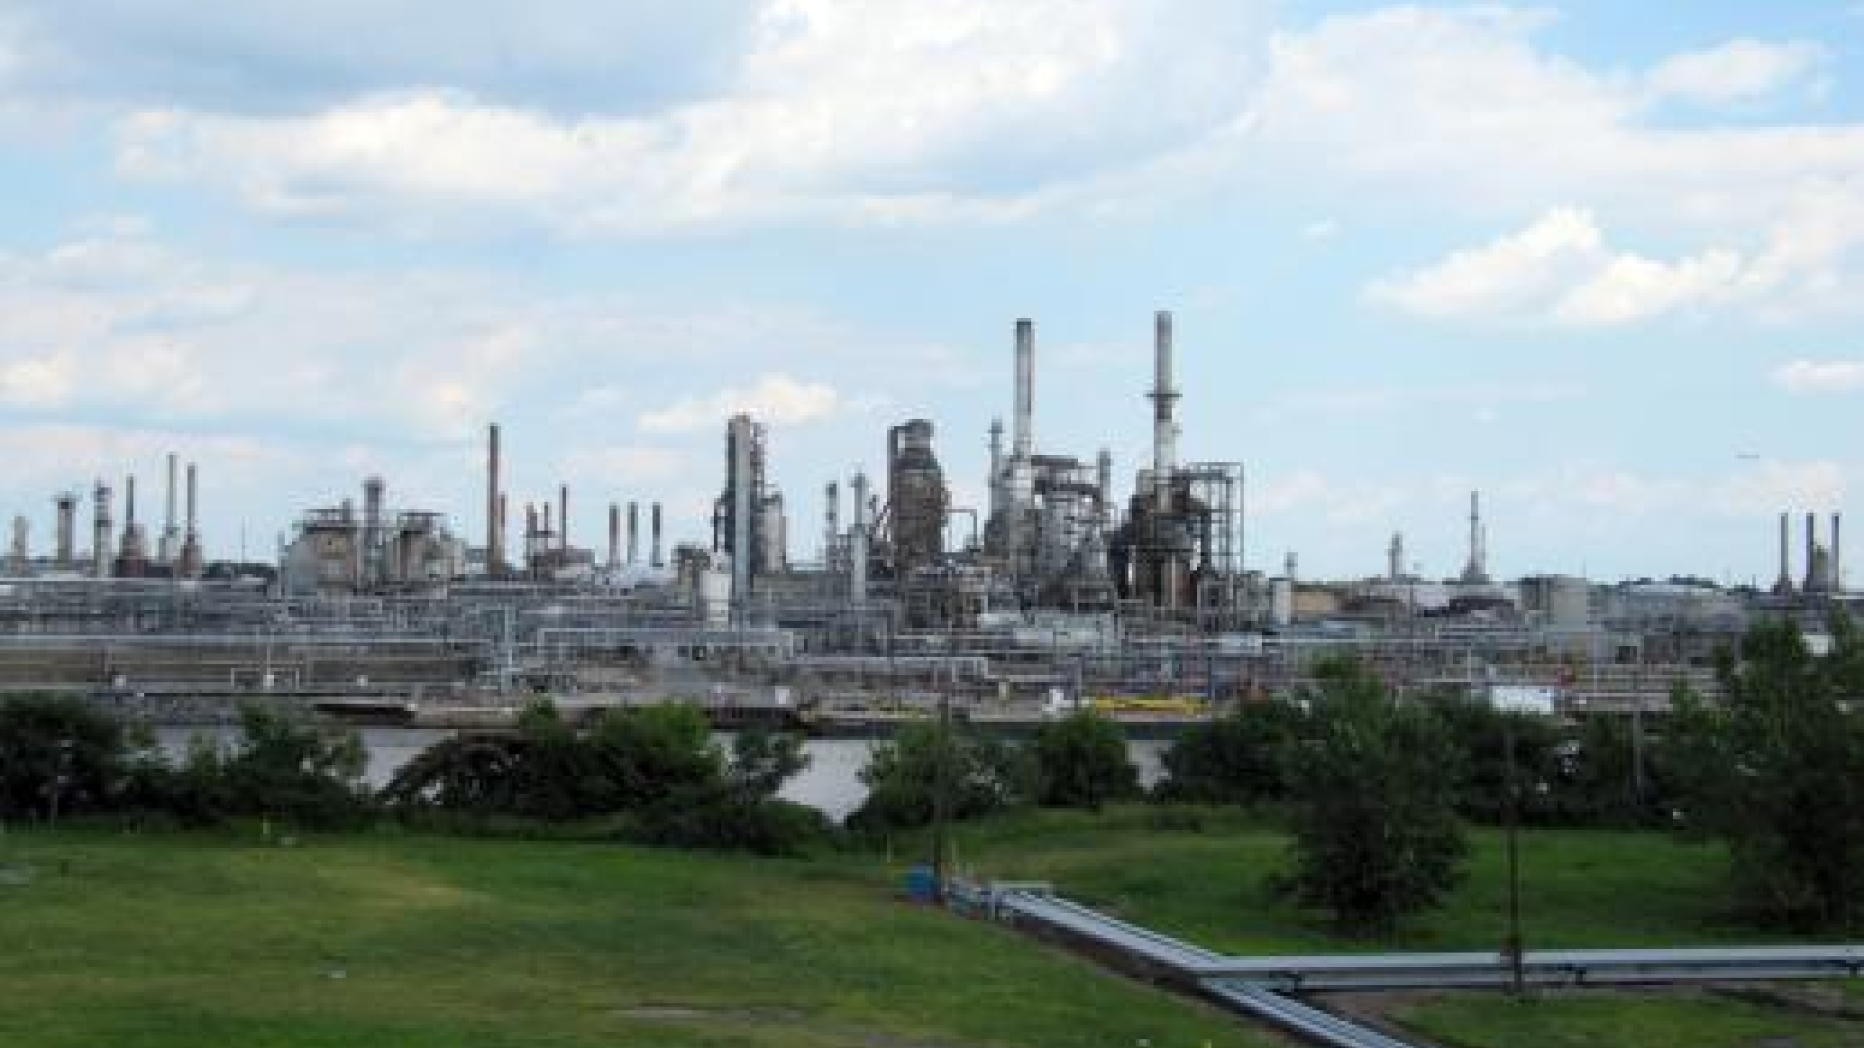 An oil refinery as seen from the opposite side of the Schuylkill river.